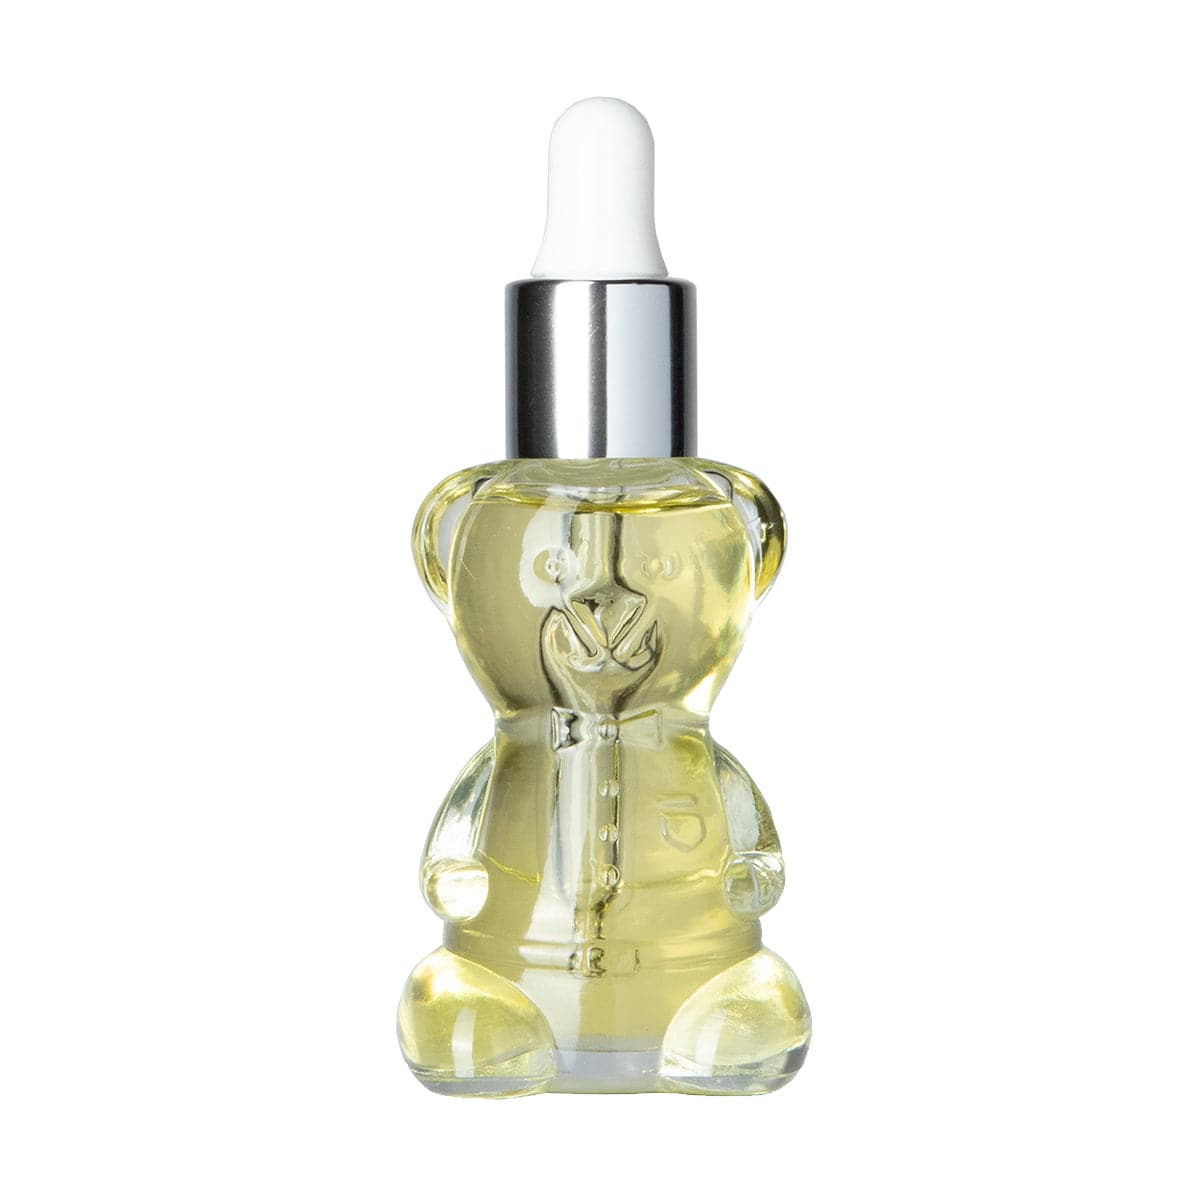 a clean image of the IN YOUR FACE NOURISHING OIL on a white background. The oil is in a clear Bear-shaped bottle with a squeezable dropper inside. The oil is a beautiful clear golden color.